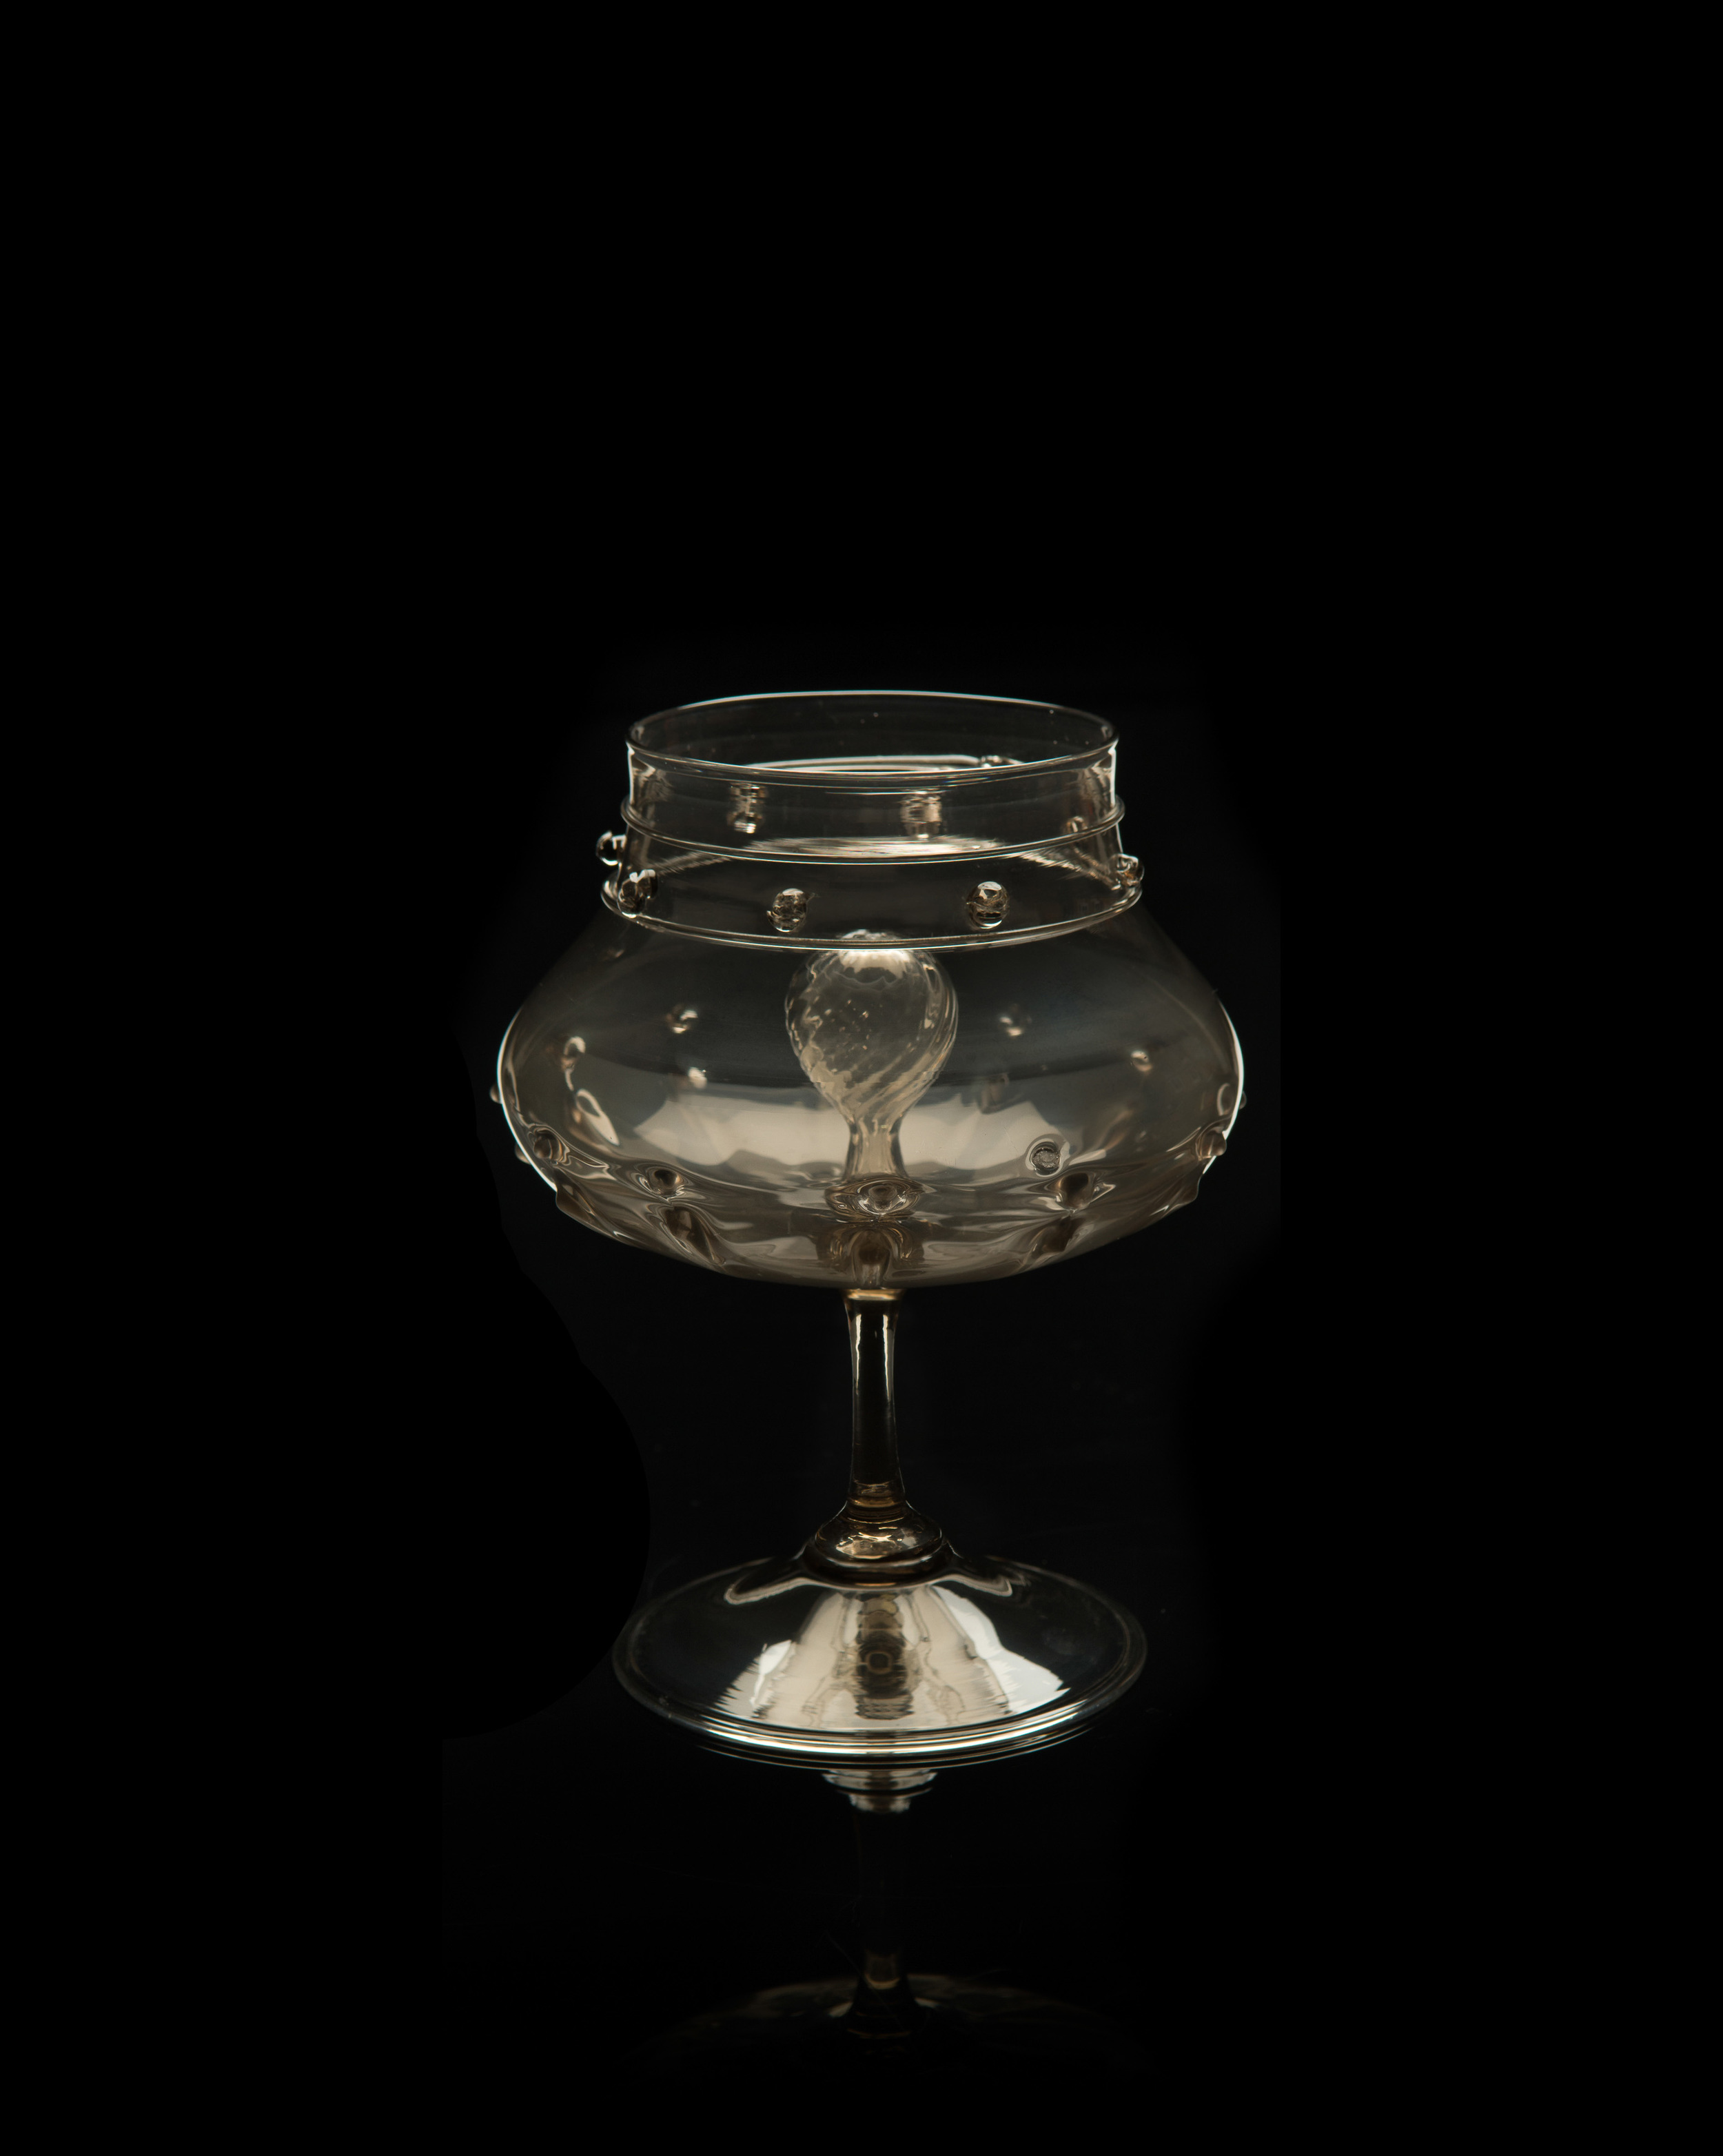  Salviati and Company,&nbsp; Stemmed Vase with Internal Knop&nbsp; (circa 1885, glass, 6 1/2 inches), VV.589 